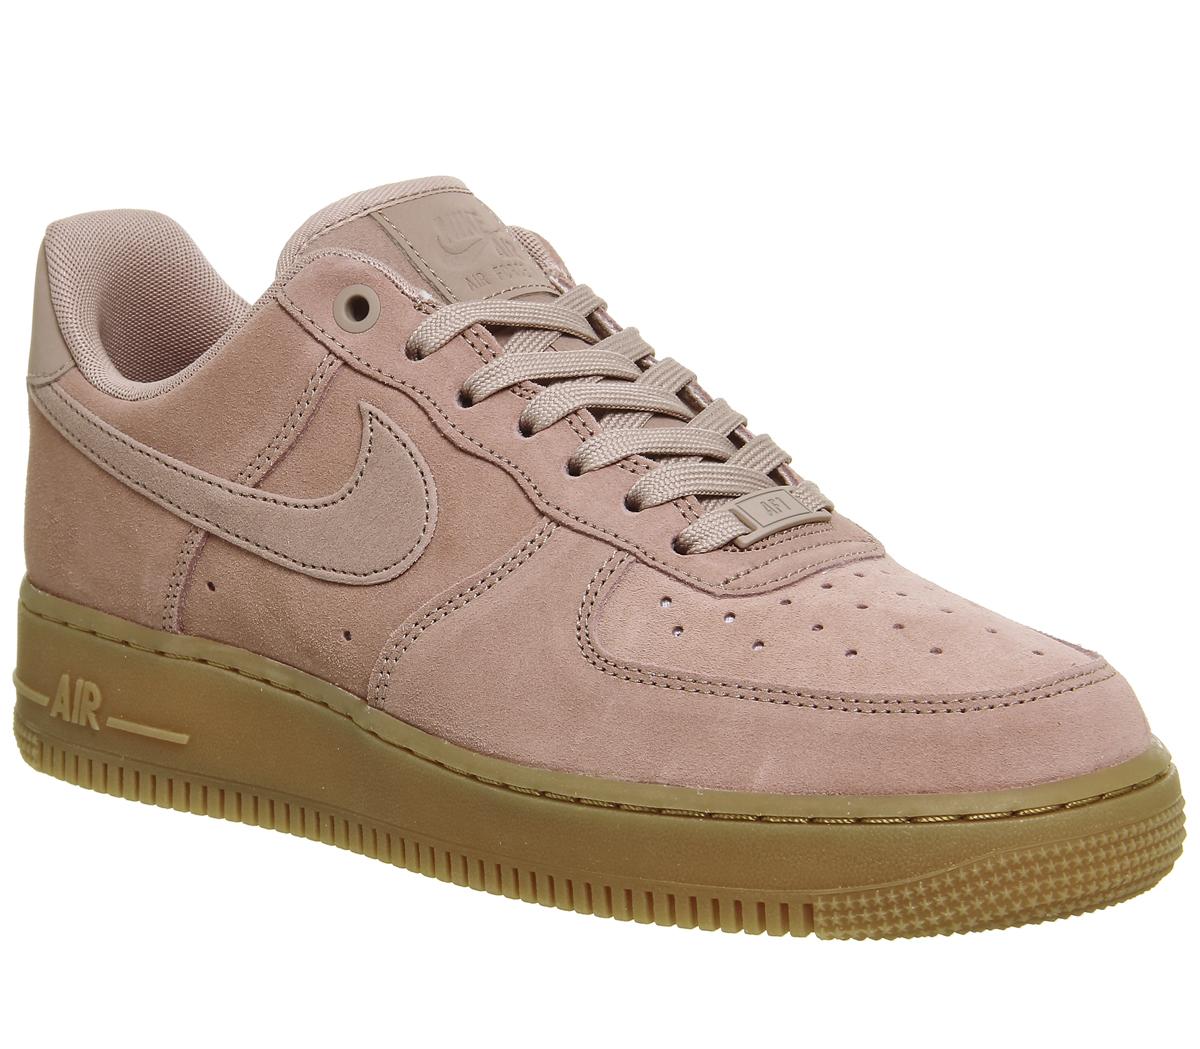 nike air force 1 particle pink